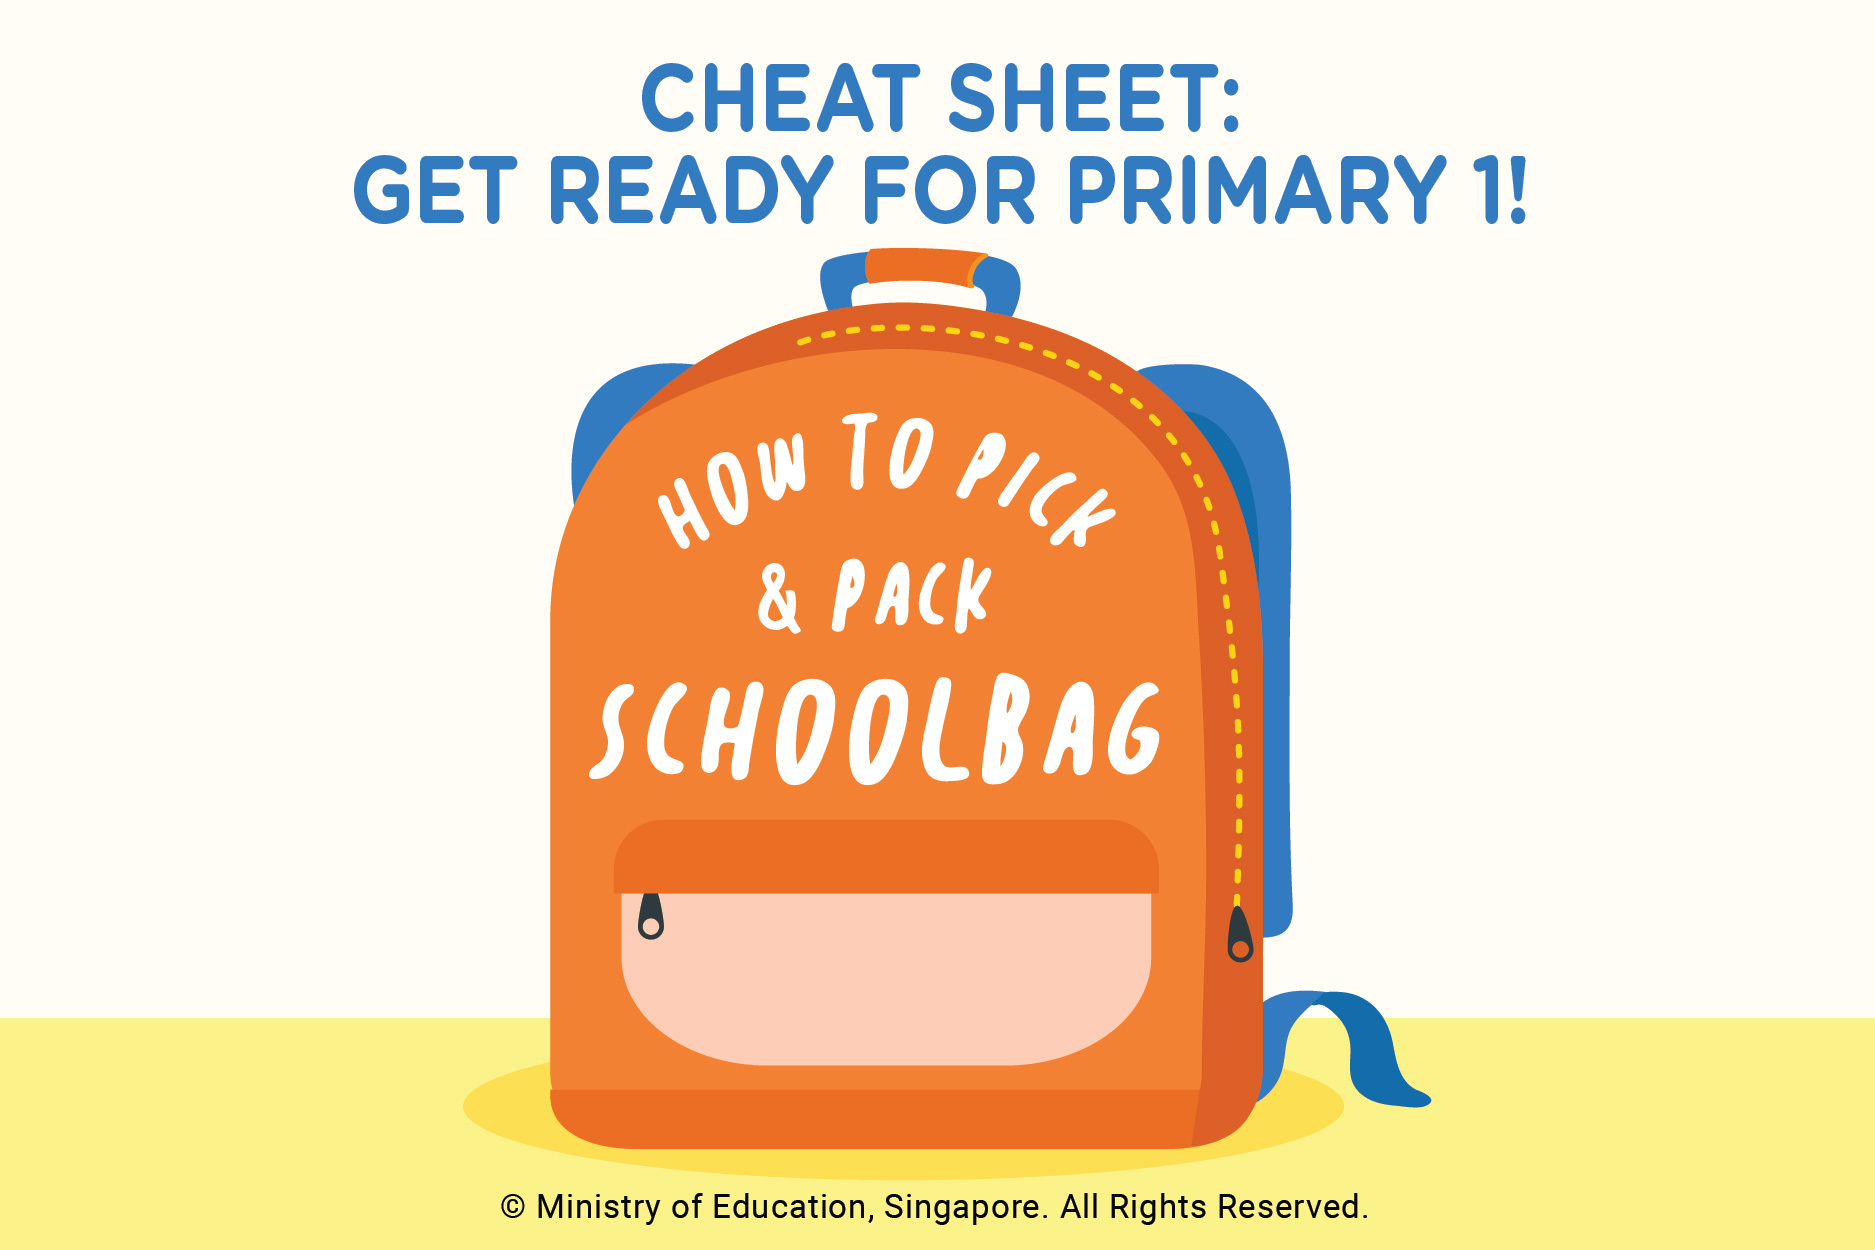 P1 cheat sheet: How to pick and pack your schoolbag